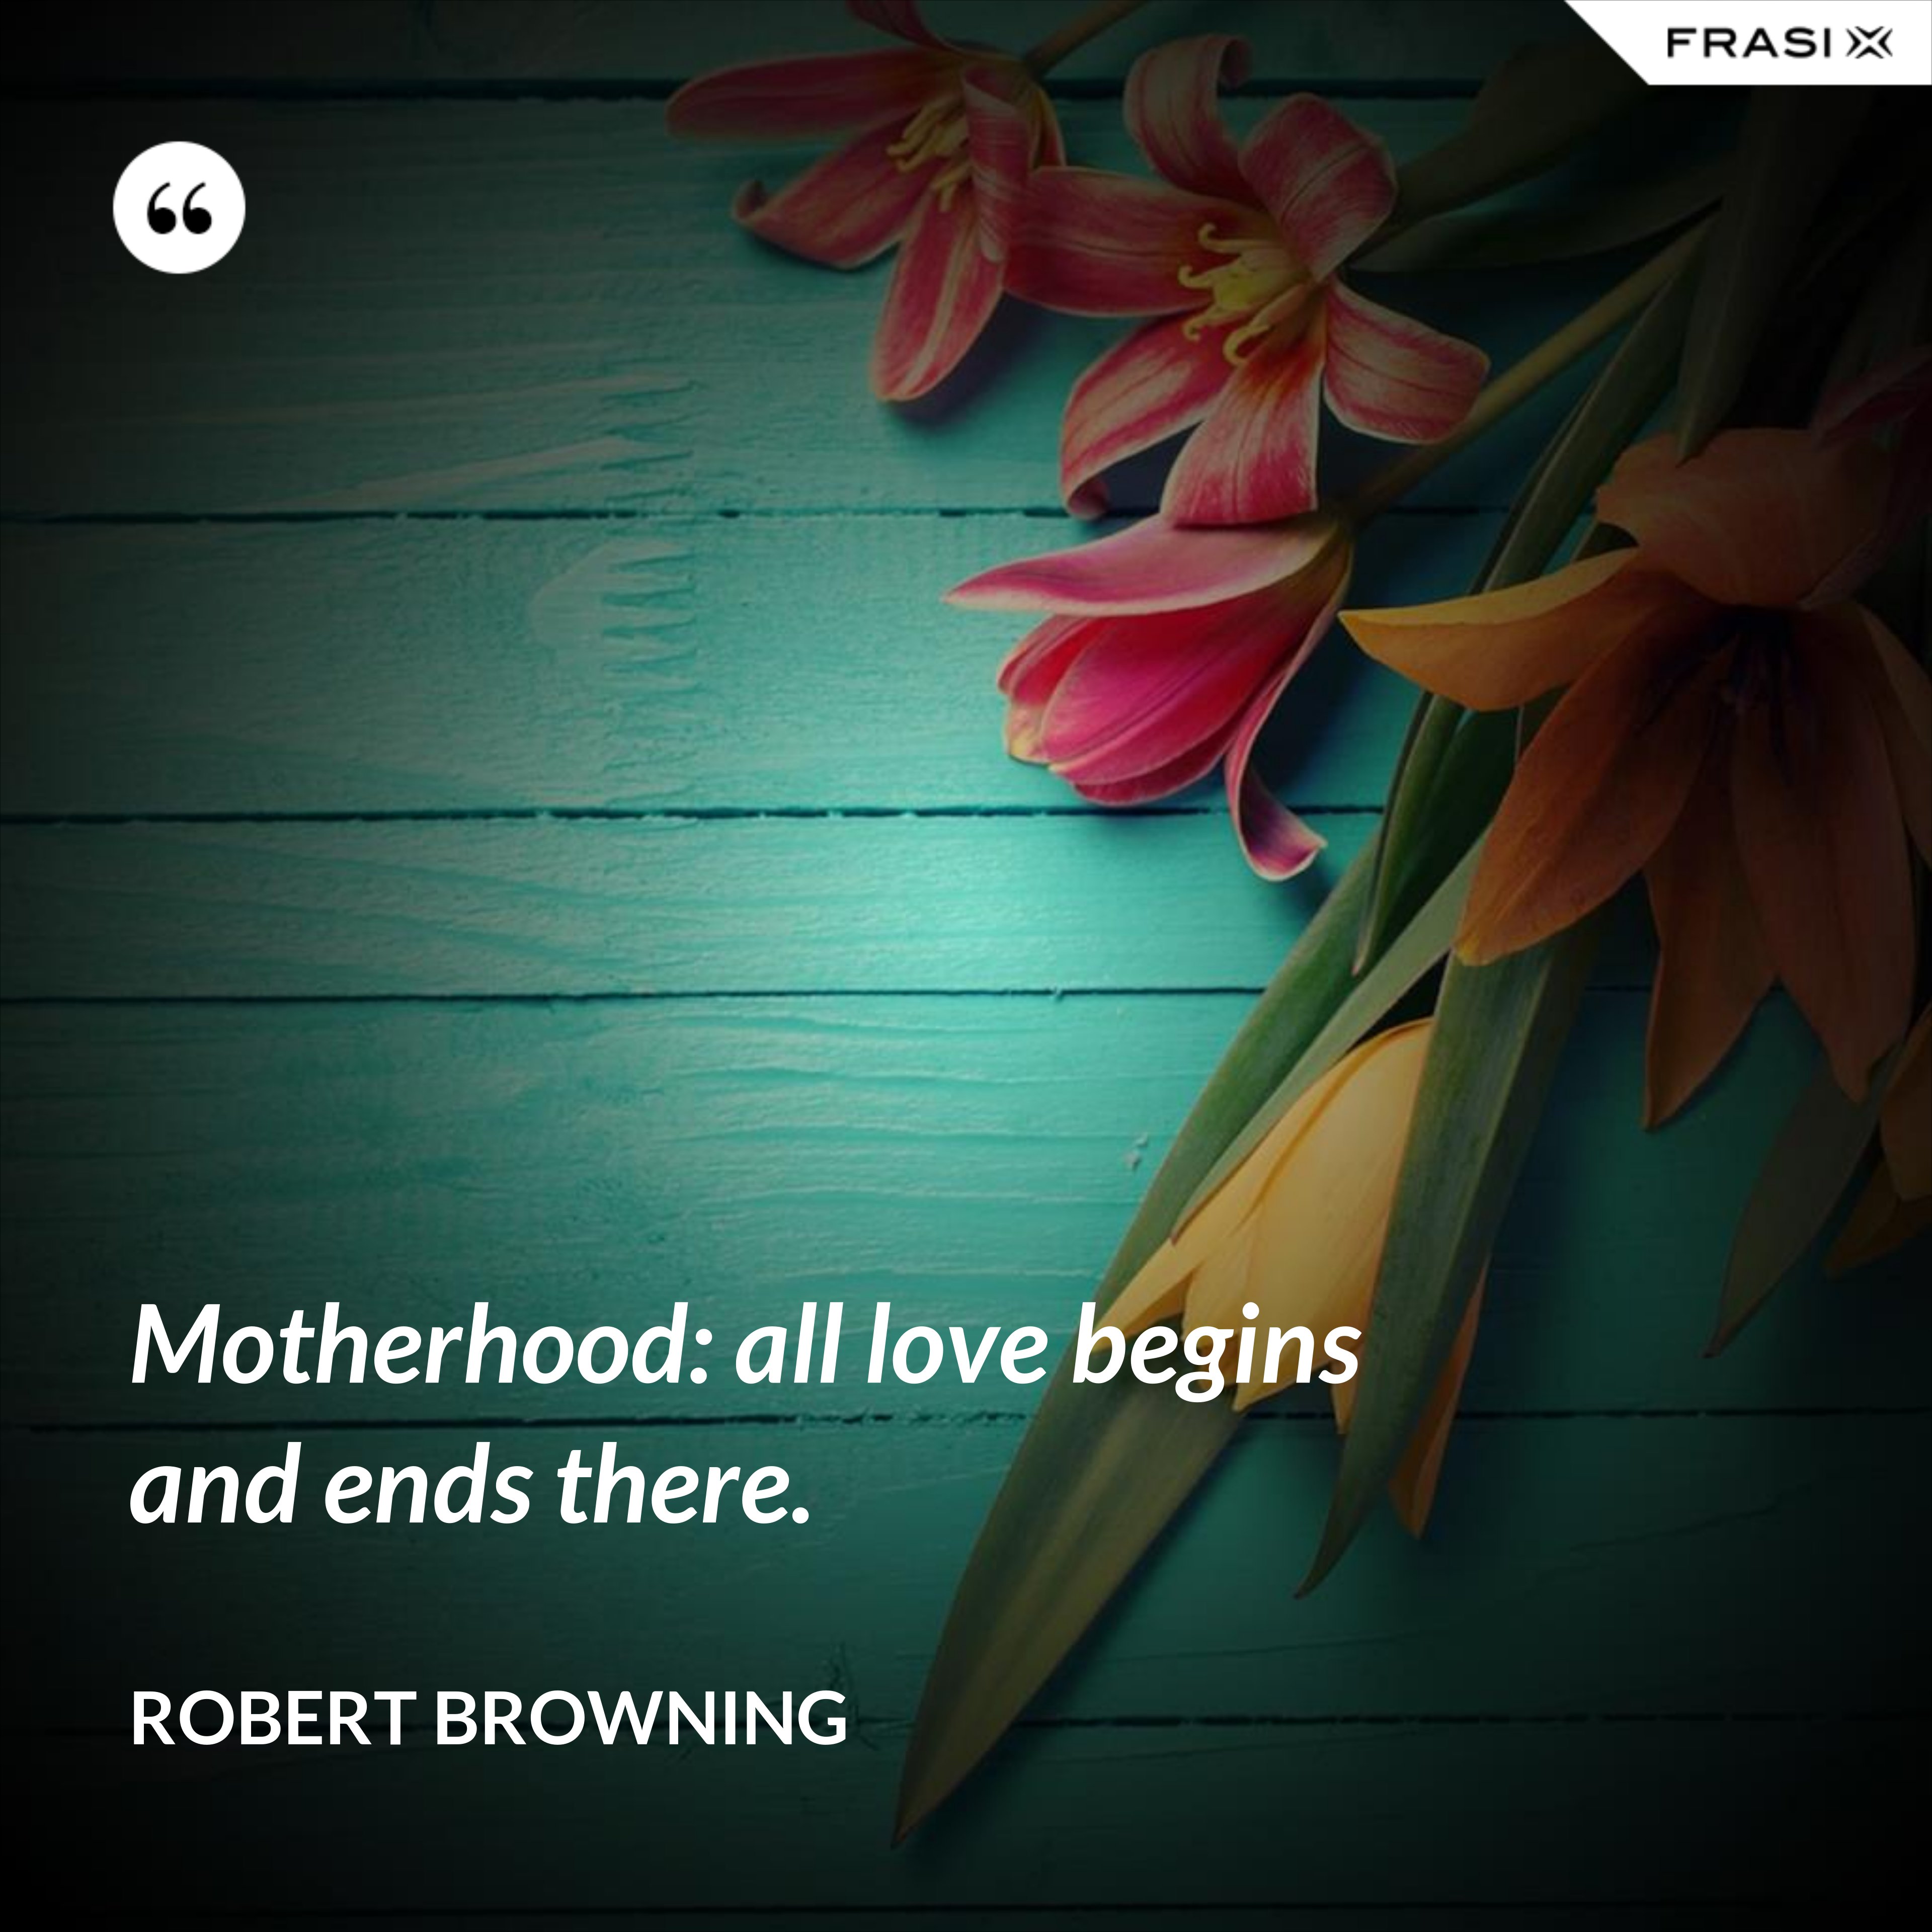 Motherhood: all love begins and ends there. - Robert Browning